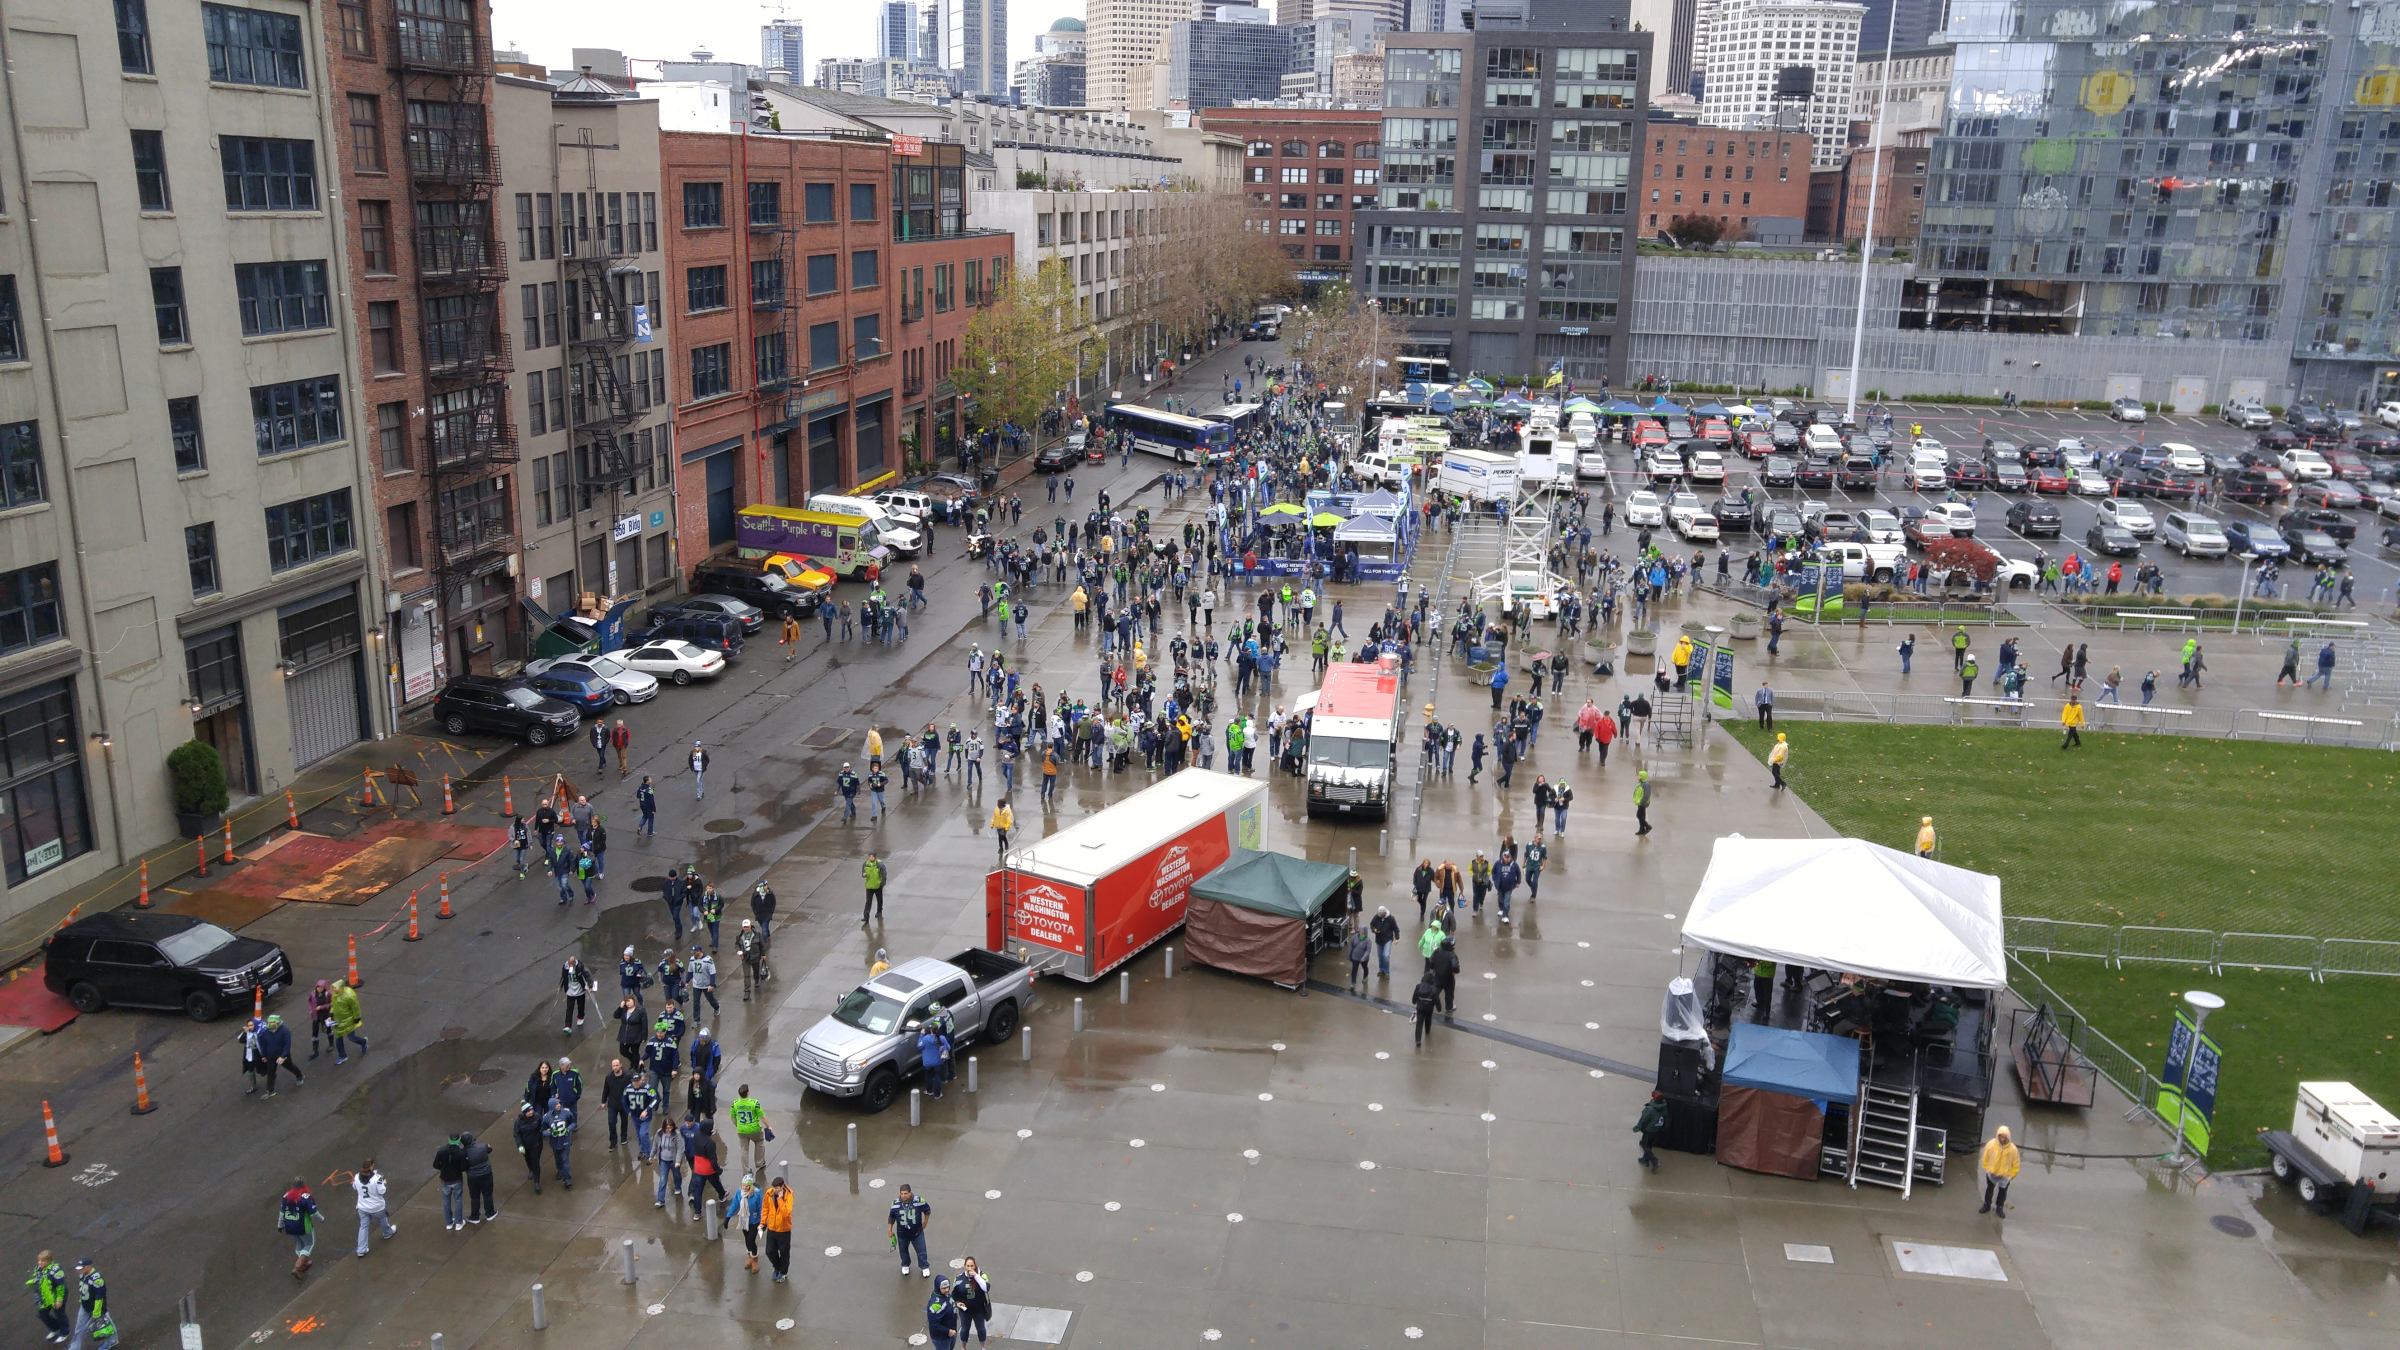 A 180-degree view maximizes visibility and can be applied in busy locations, like CenturyLink Field, where the Immersive Imaging System is currently being demonstrated.